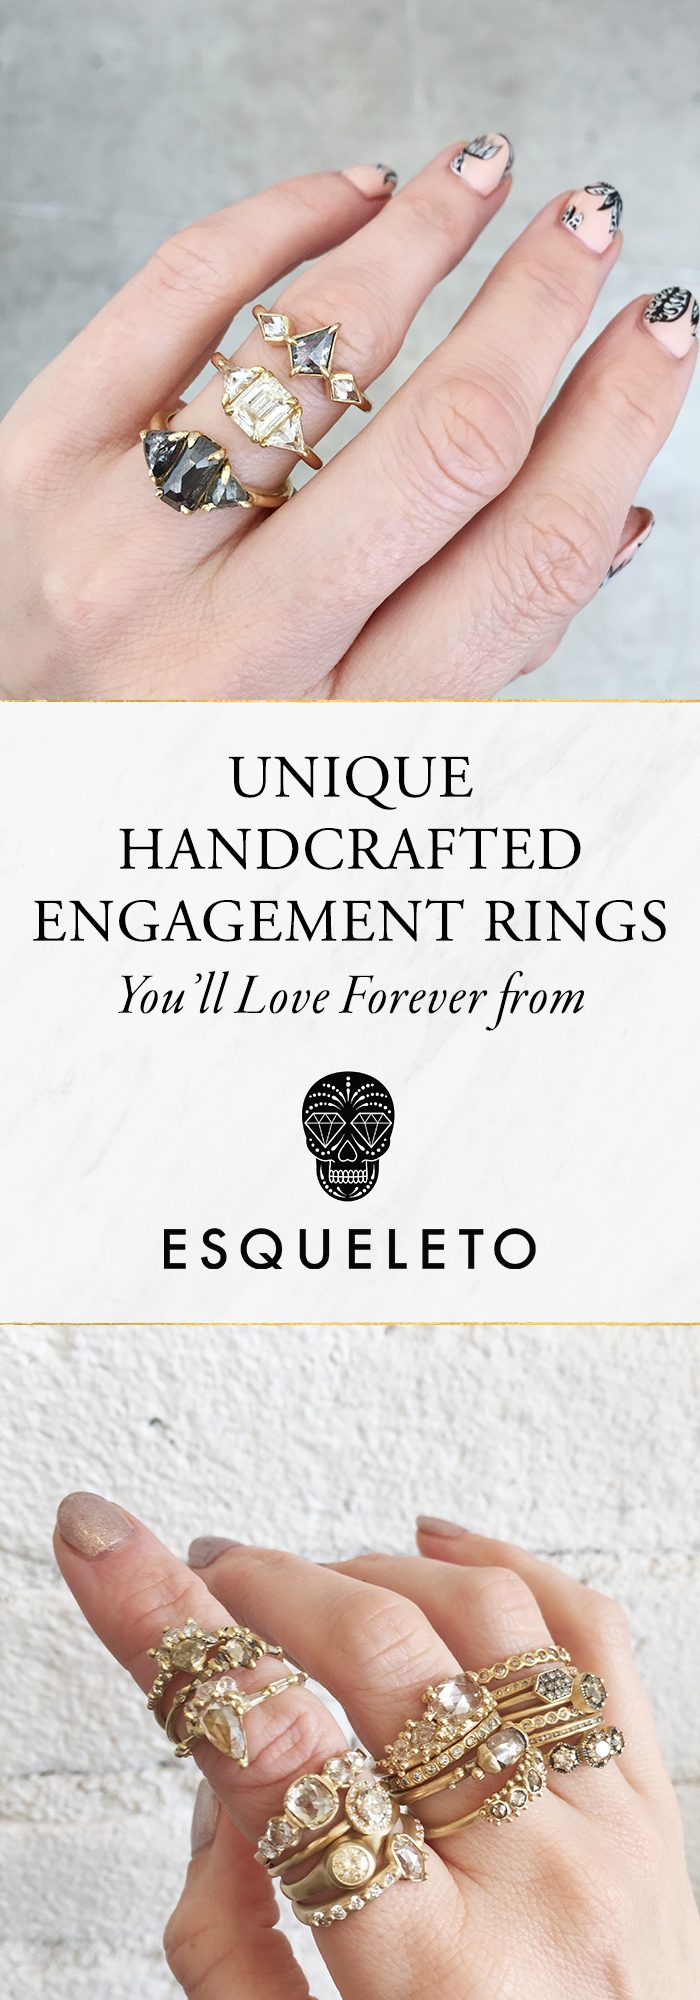 Unique Engagement Rings, Handcrafted Wedding Bands